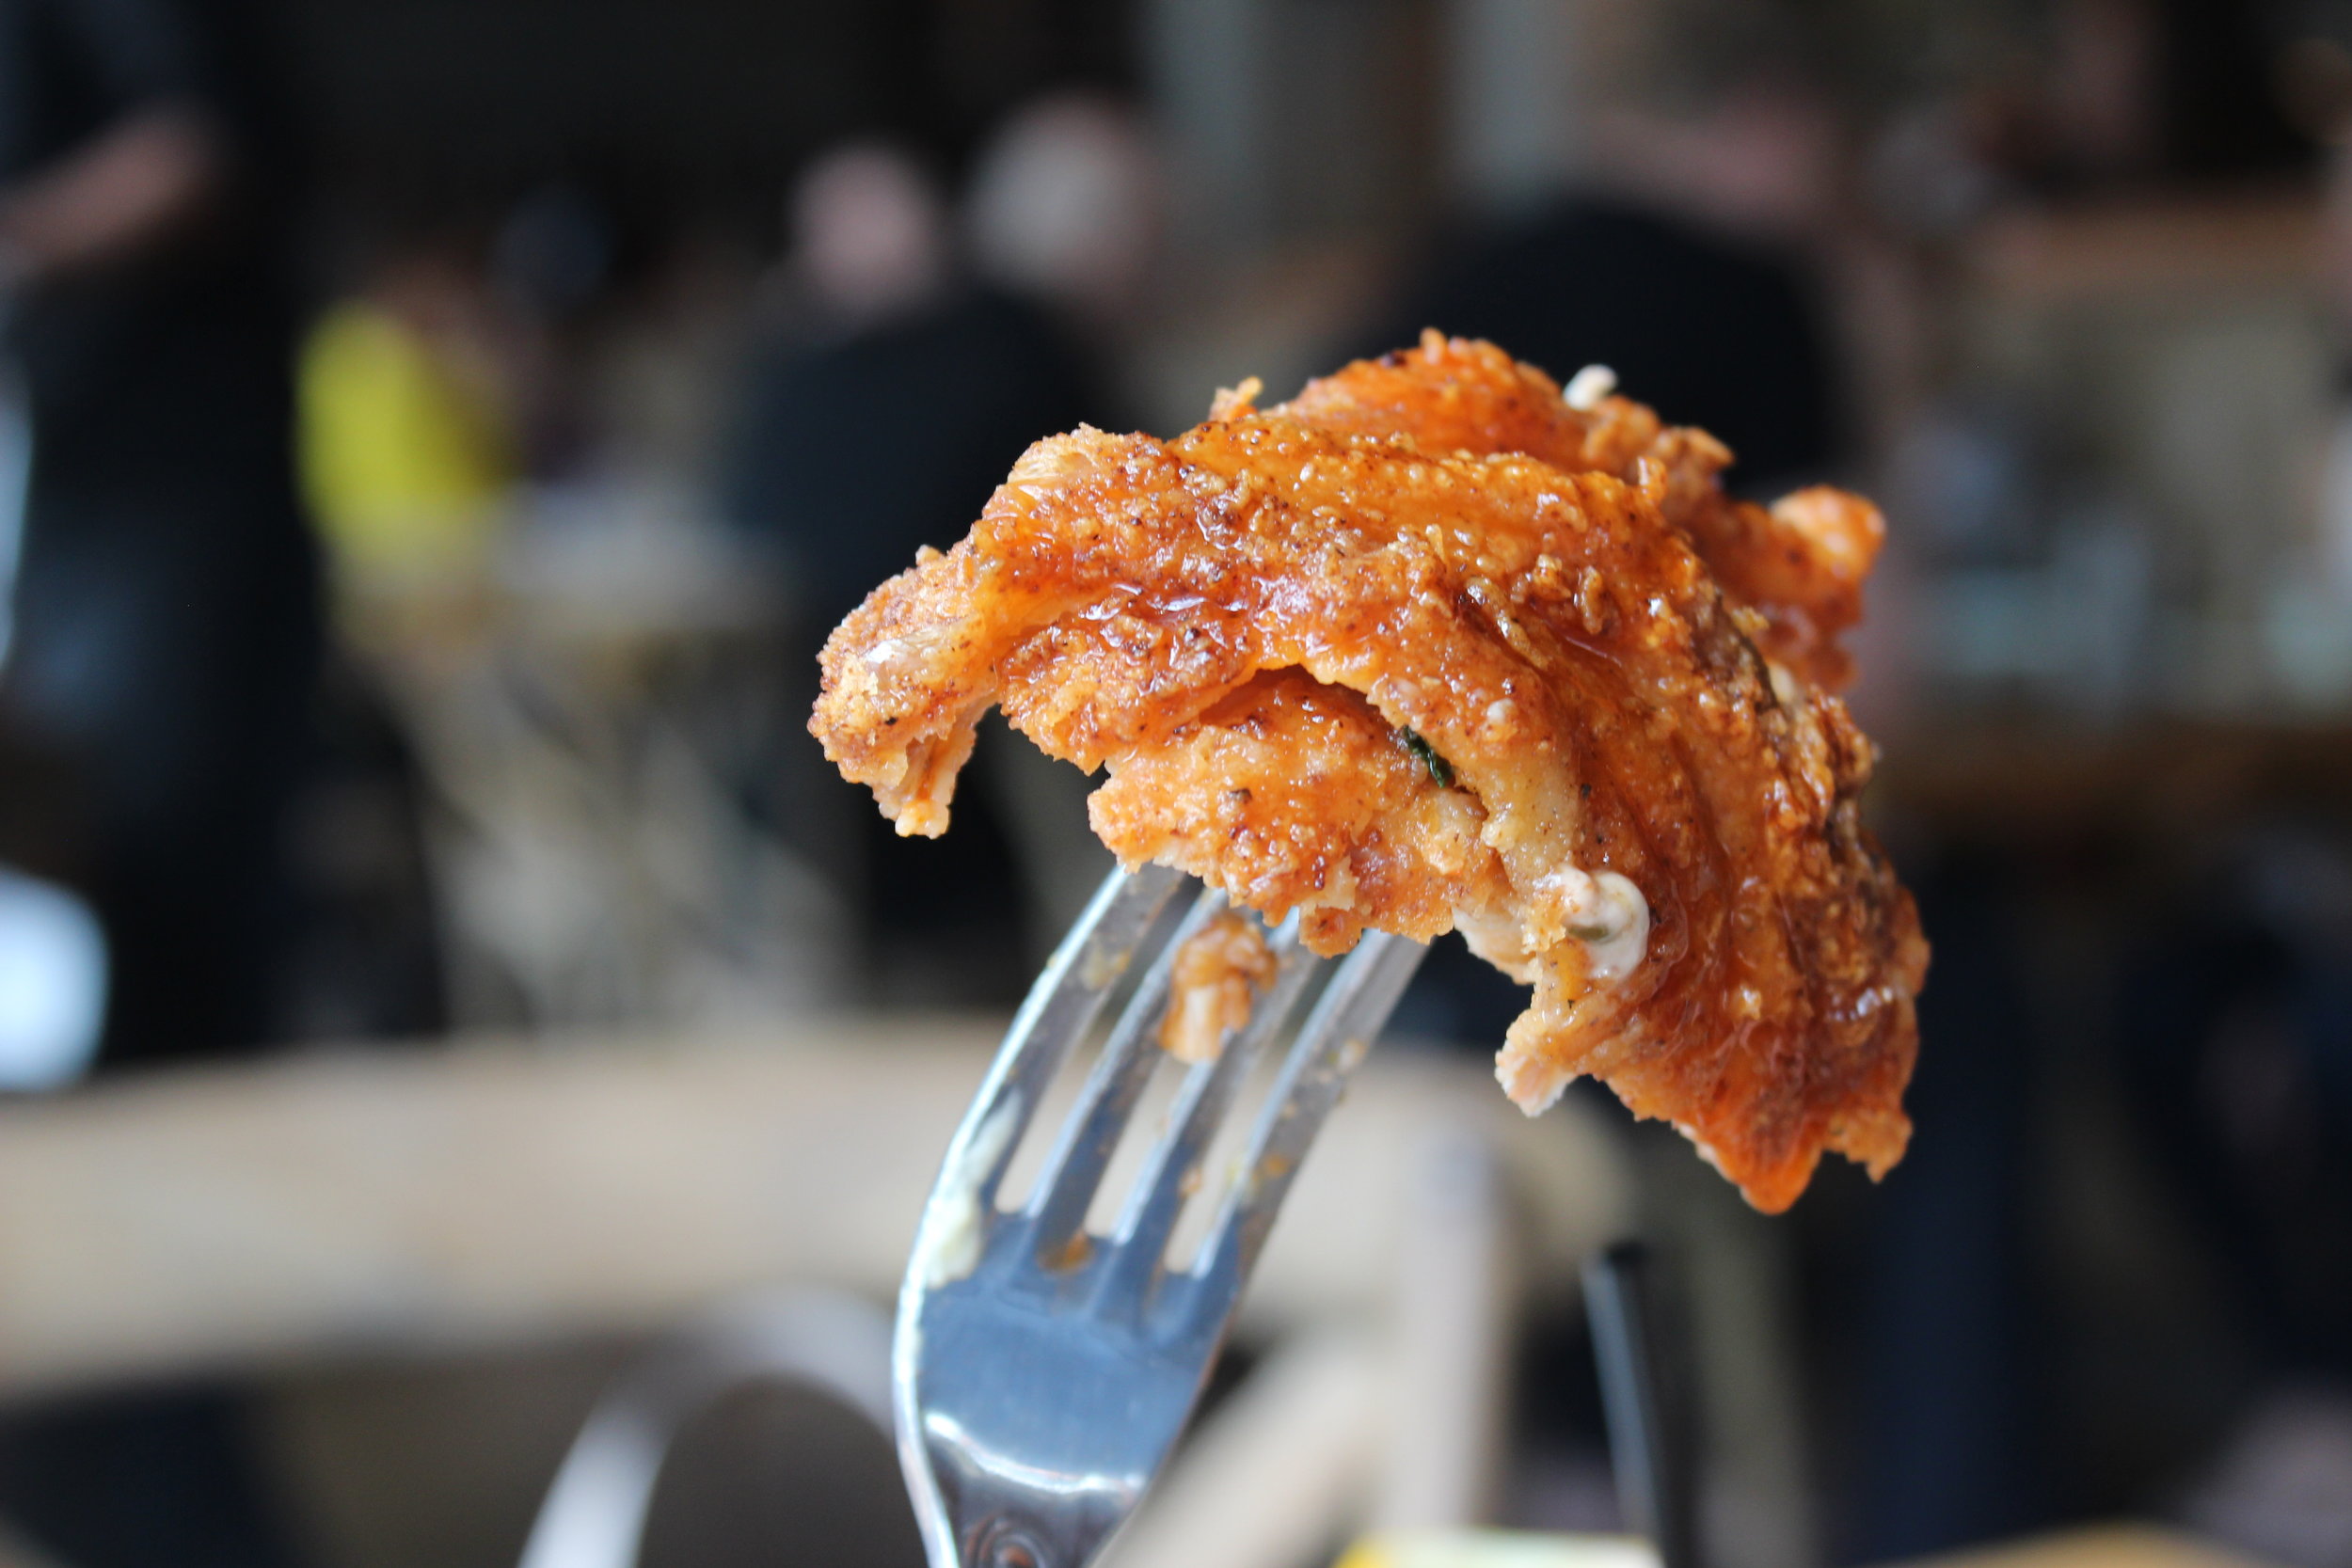 Lewellyn’s Fine Fried Chicken with honey hot sauce